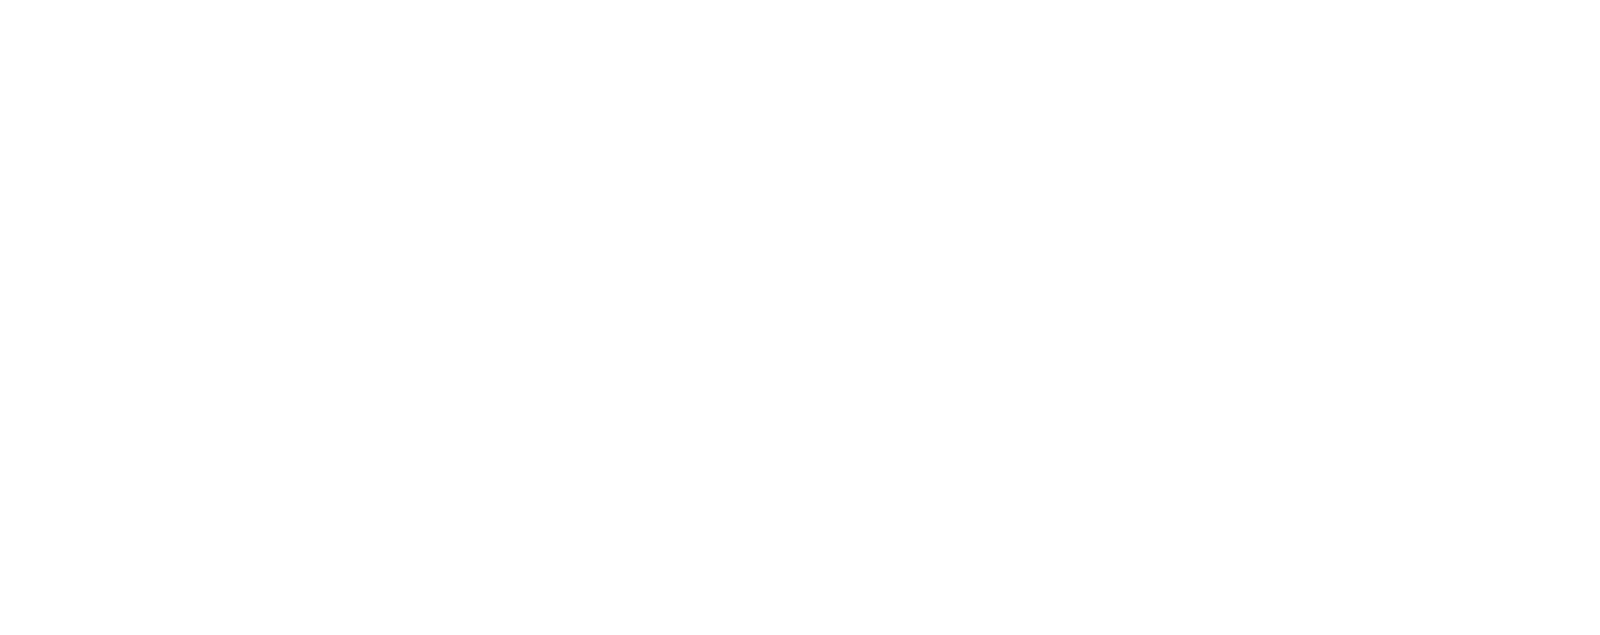 Line illustrations to convey the dimensions of the Aeron Chair. Size B, medium, has a total height of 36.75 – 43.25